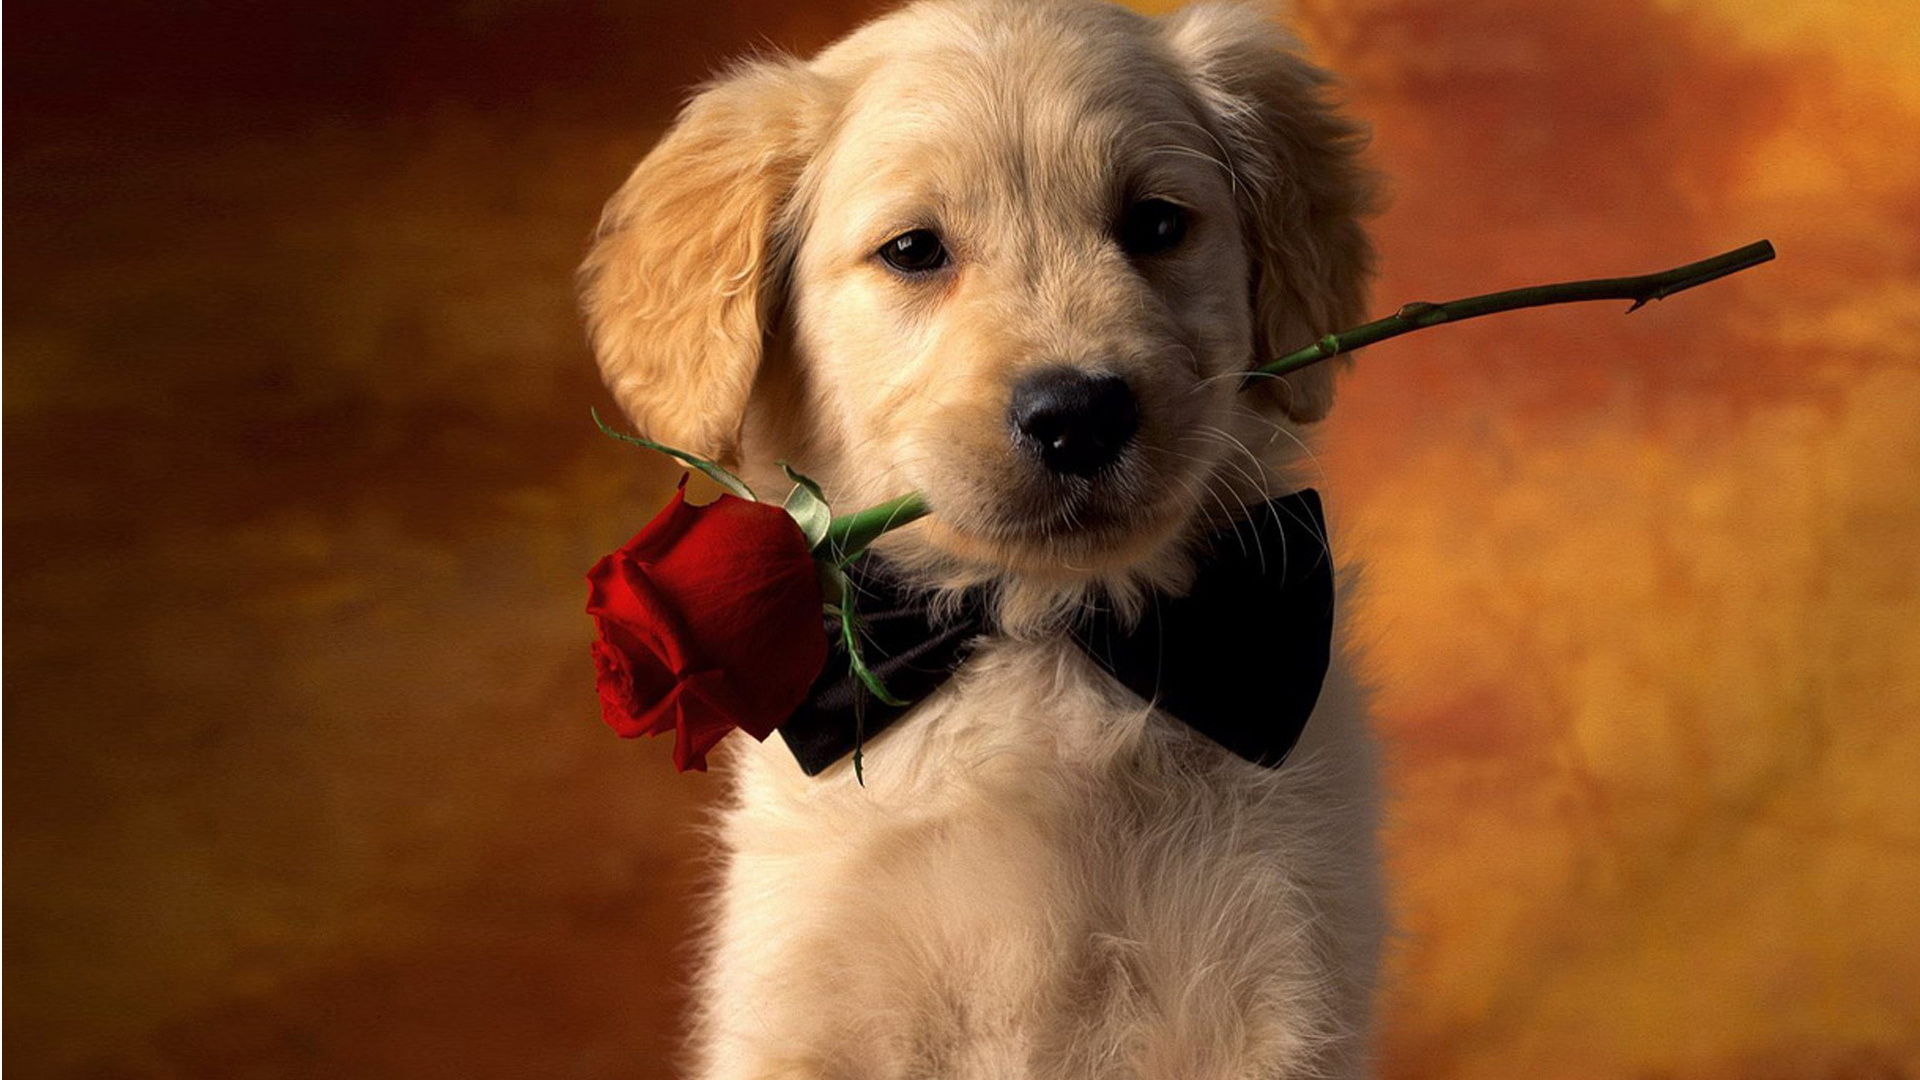 13262 1440x900 PC pictures for free, download roses, dogs, animals, holidays 1440x900 wallpapers on your desktop